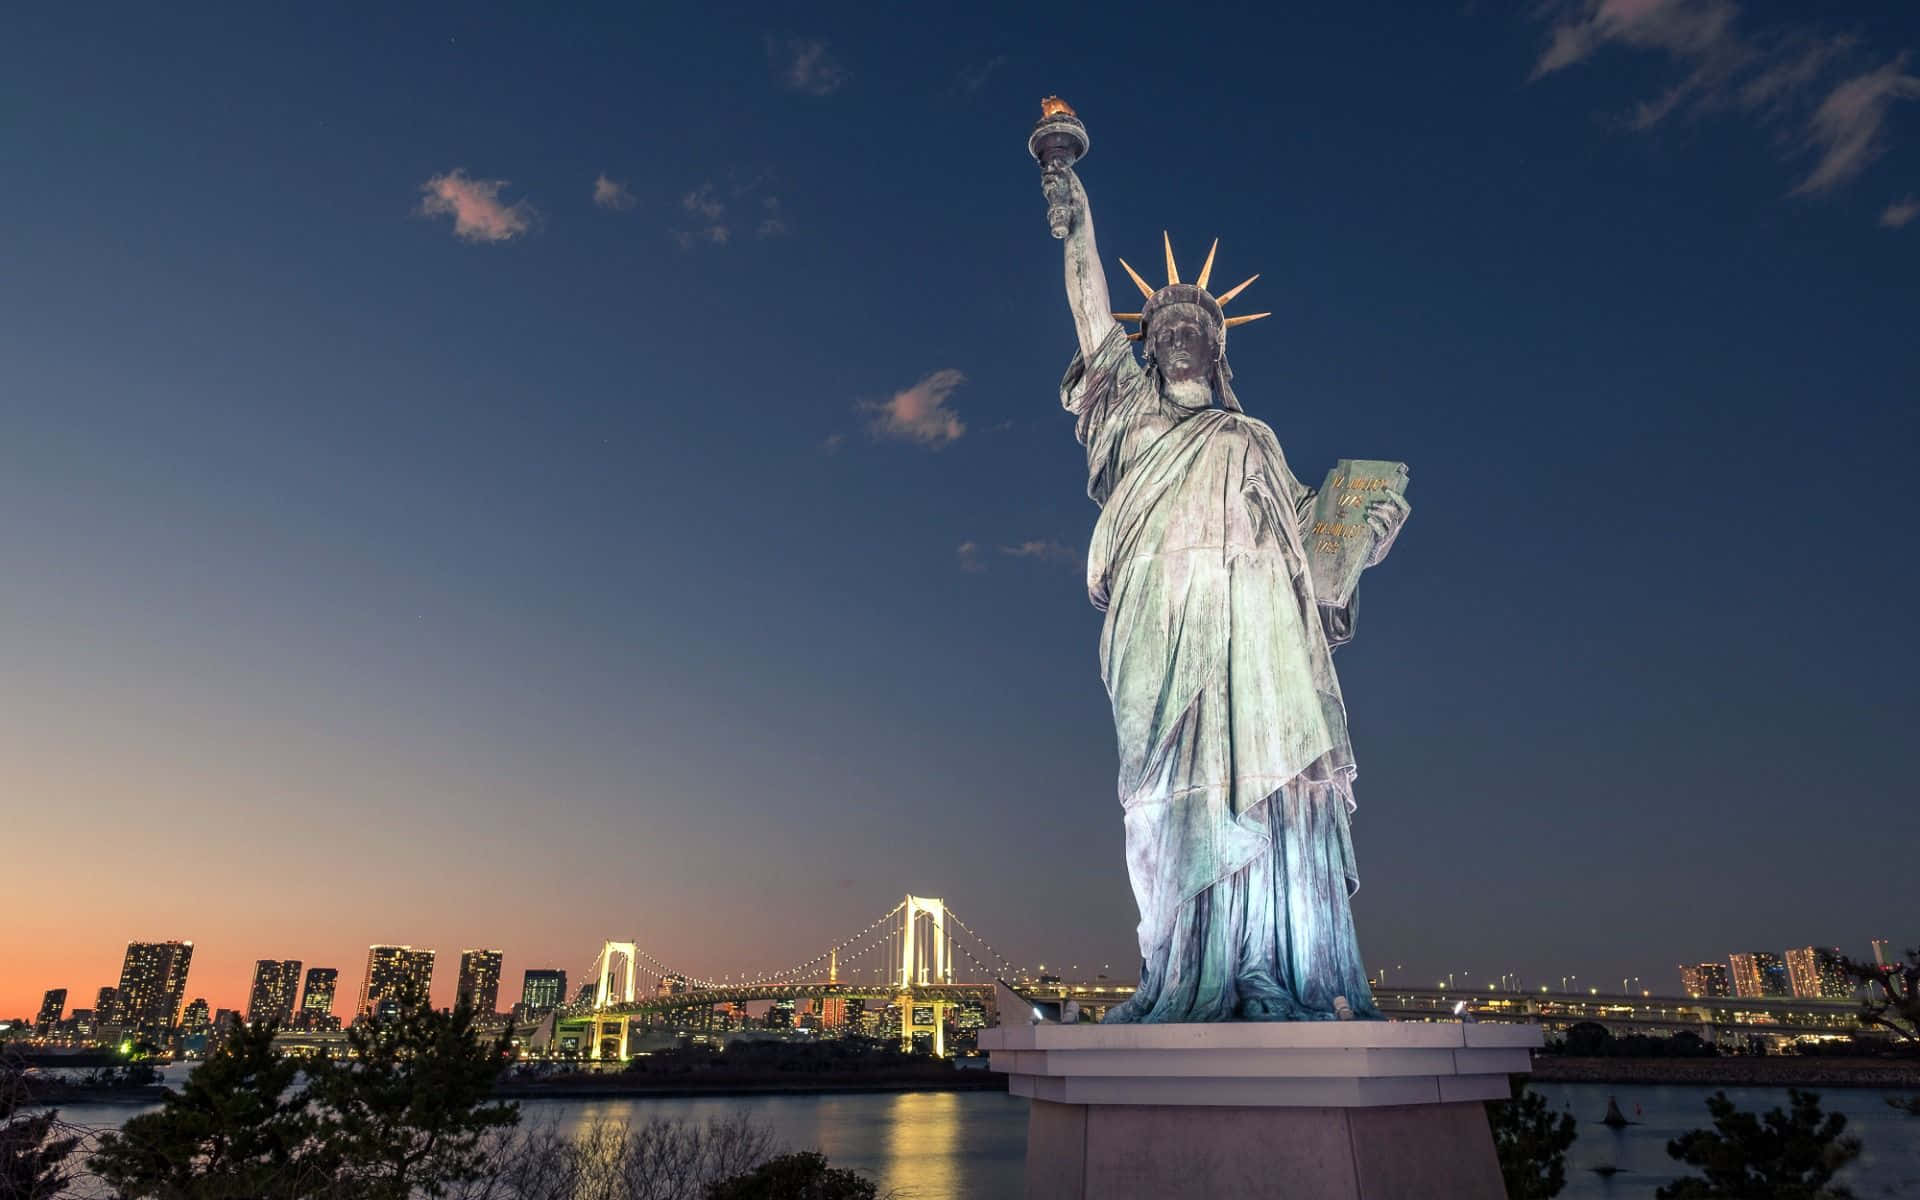 The Statue Of Liberty Is Lit Up At Dusk